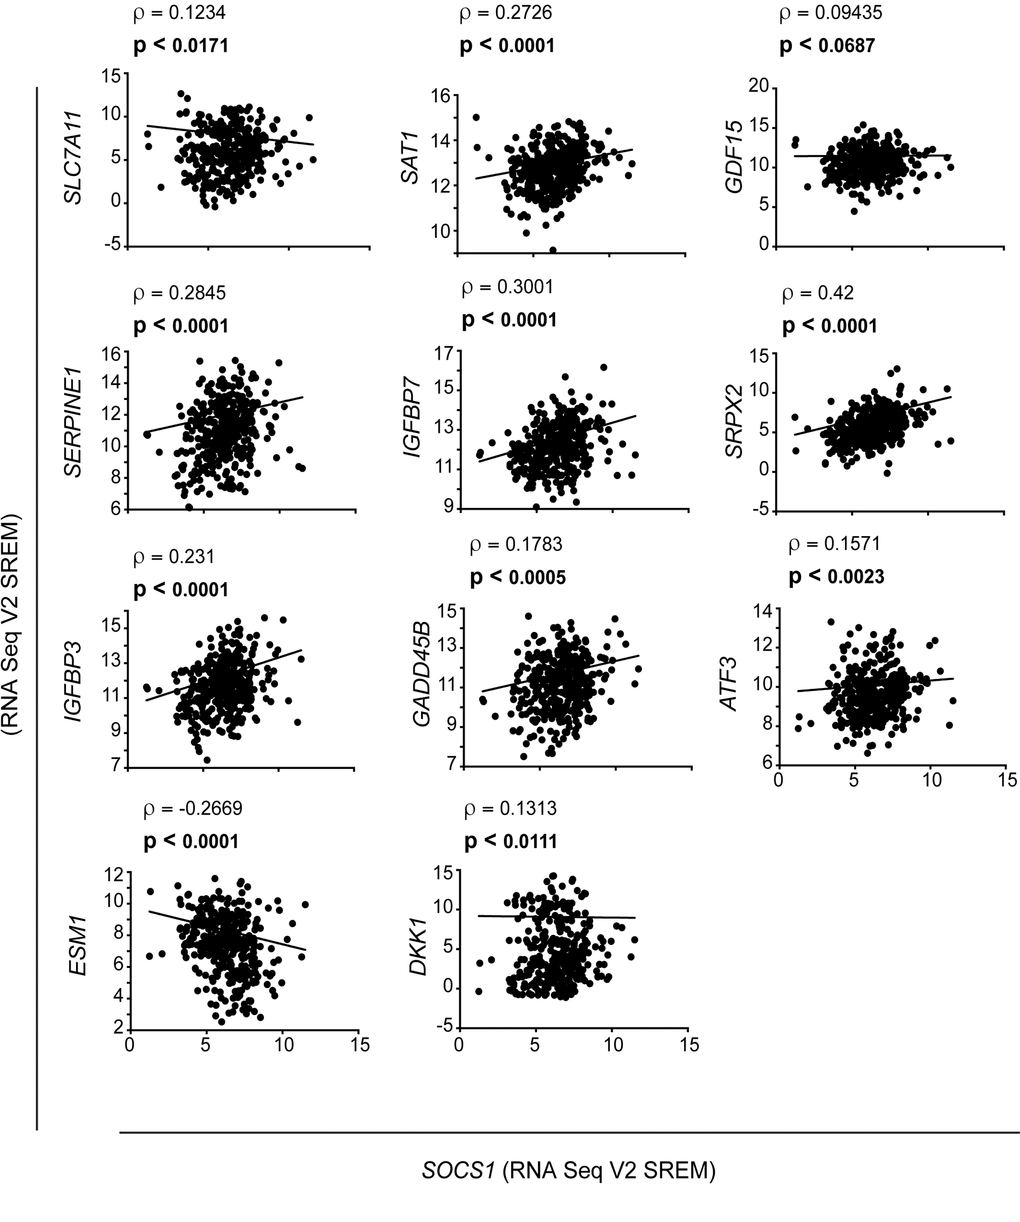 Correlation between SOCS1 and p53-target gene expression in hepatocellular carcinoma samples. The TCGA dataset human HCC specimens was analysed to determine the correlation between the expression of SOCS1 (x-axis) and the indicated p53 target genes (y-axis), as indicated by the slope. The Spearman correlation (ρ) and the p values are given at the top of each plot.